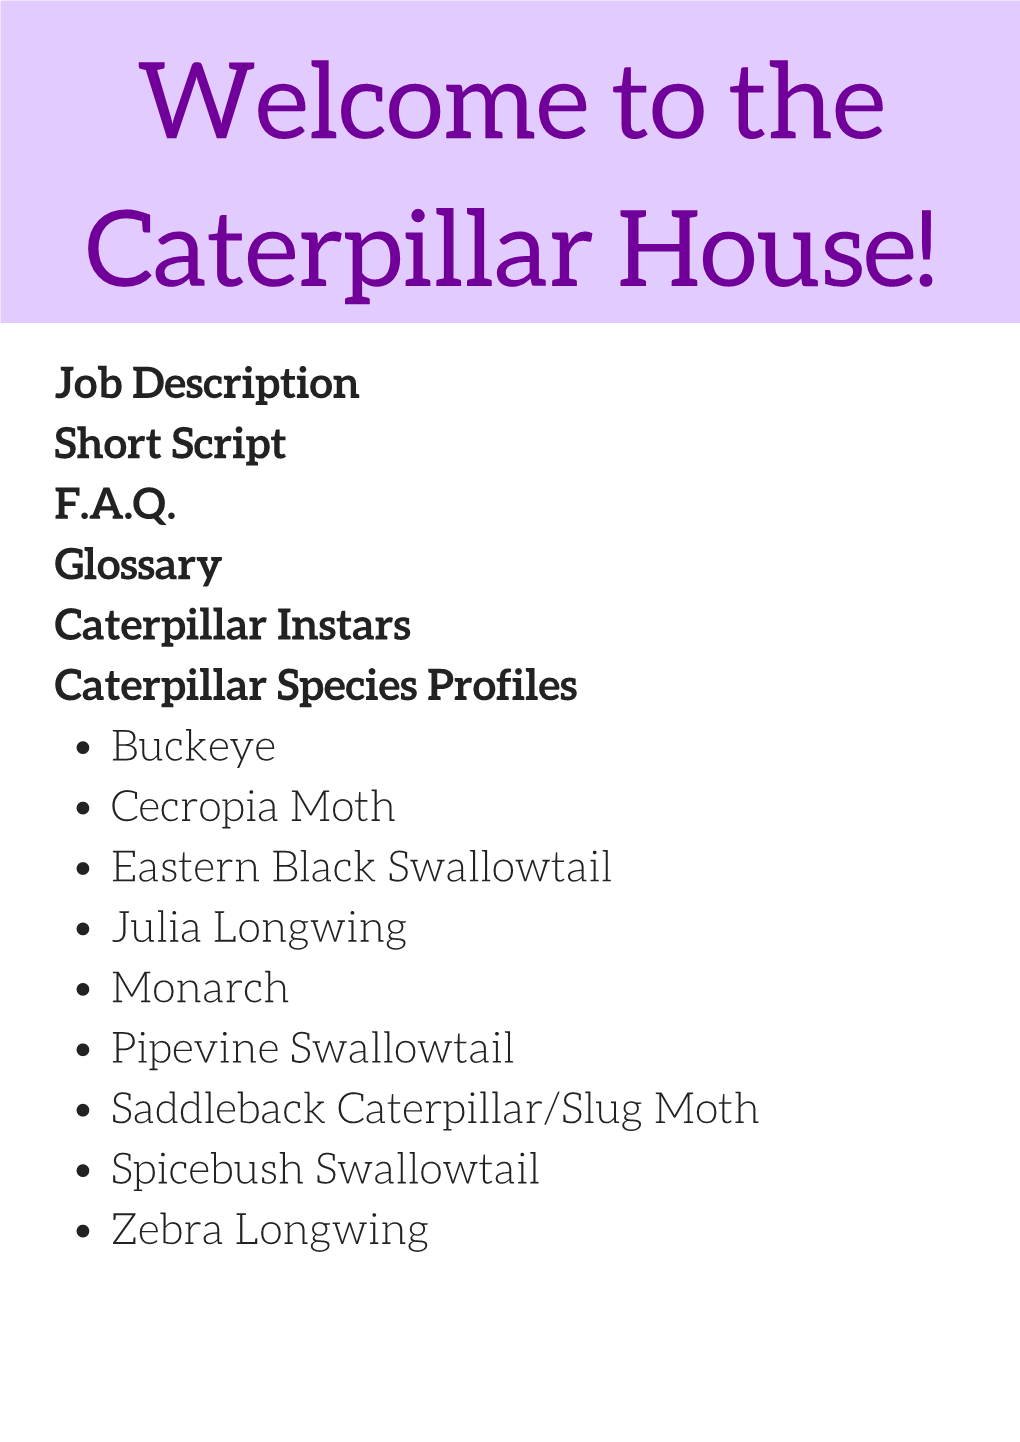 Welcome to the Caterpillar House!